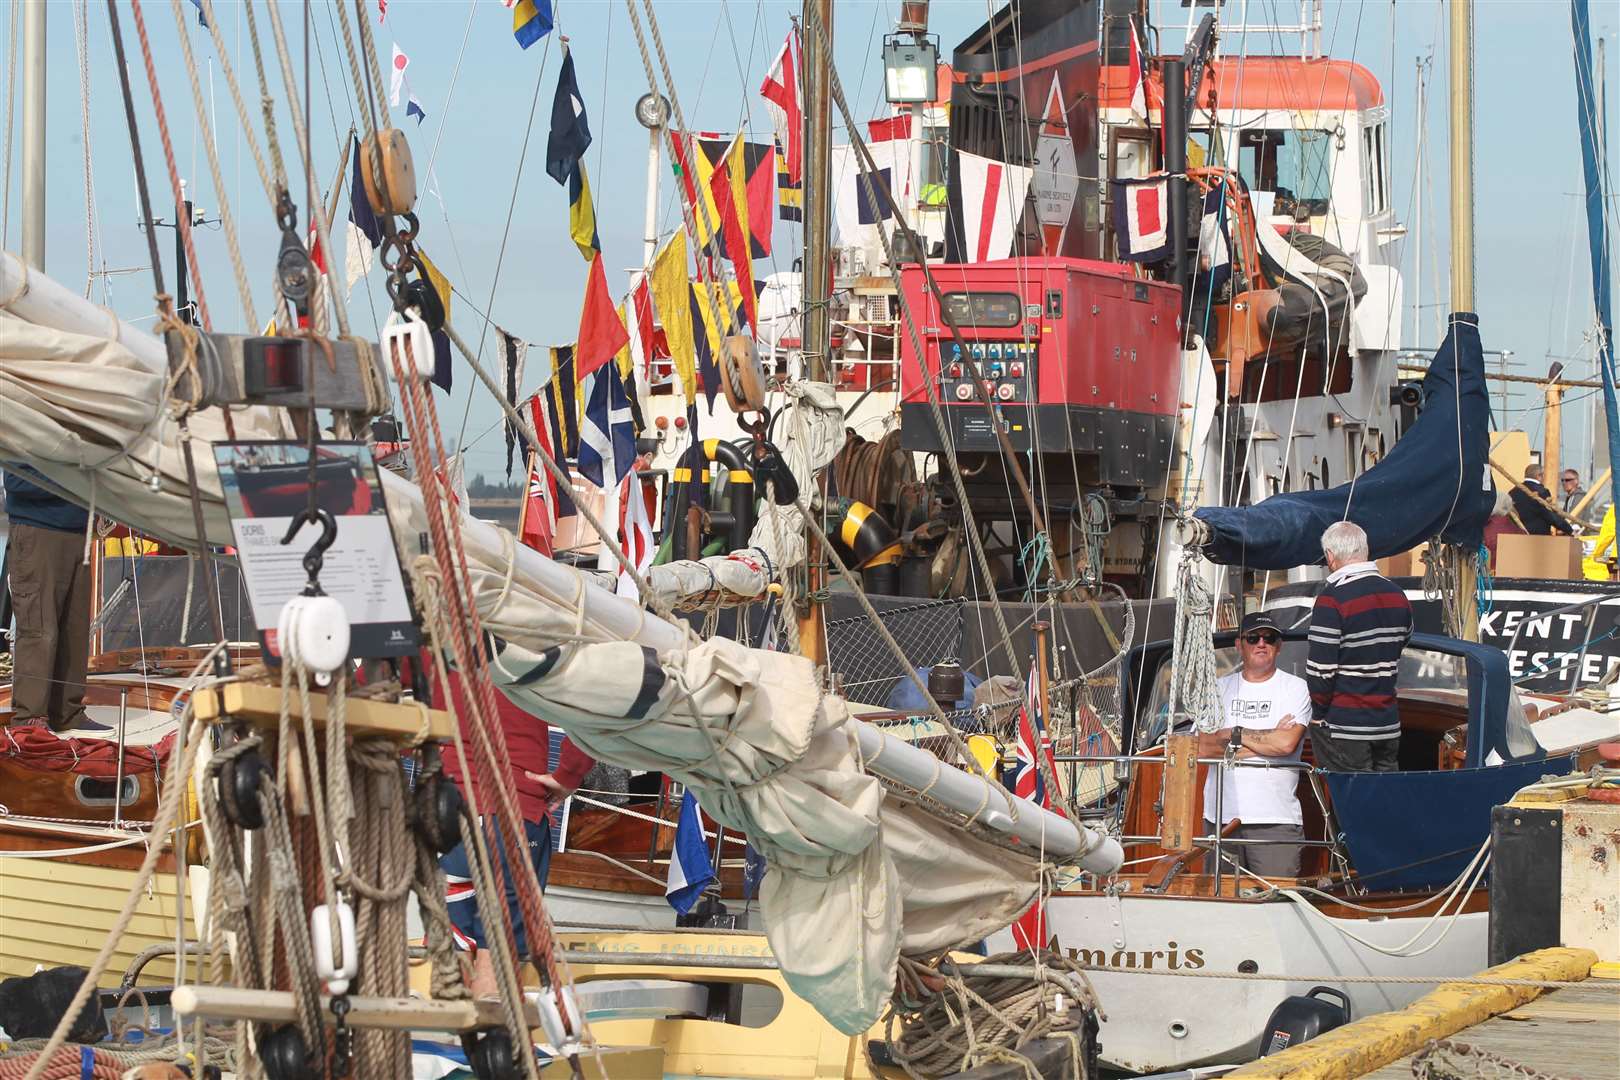 The Classic Boat Festival at Queenborough Harbour. Picture: John Westhrop